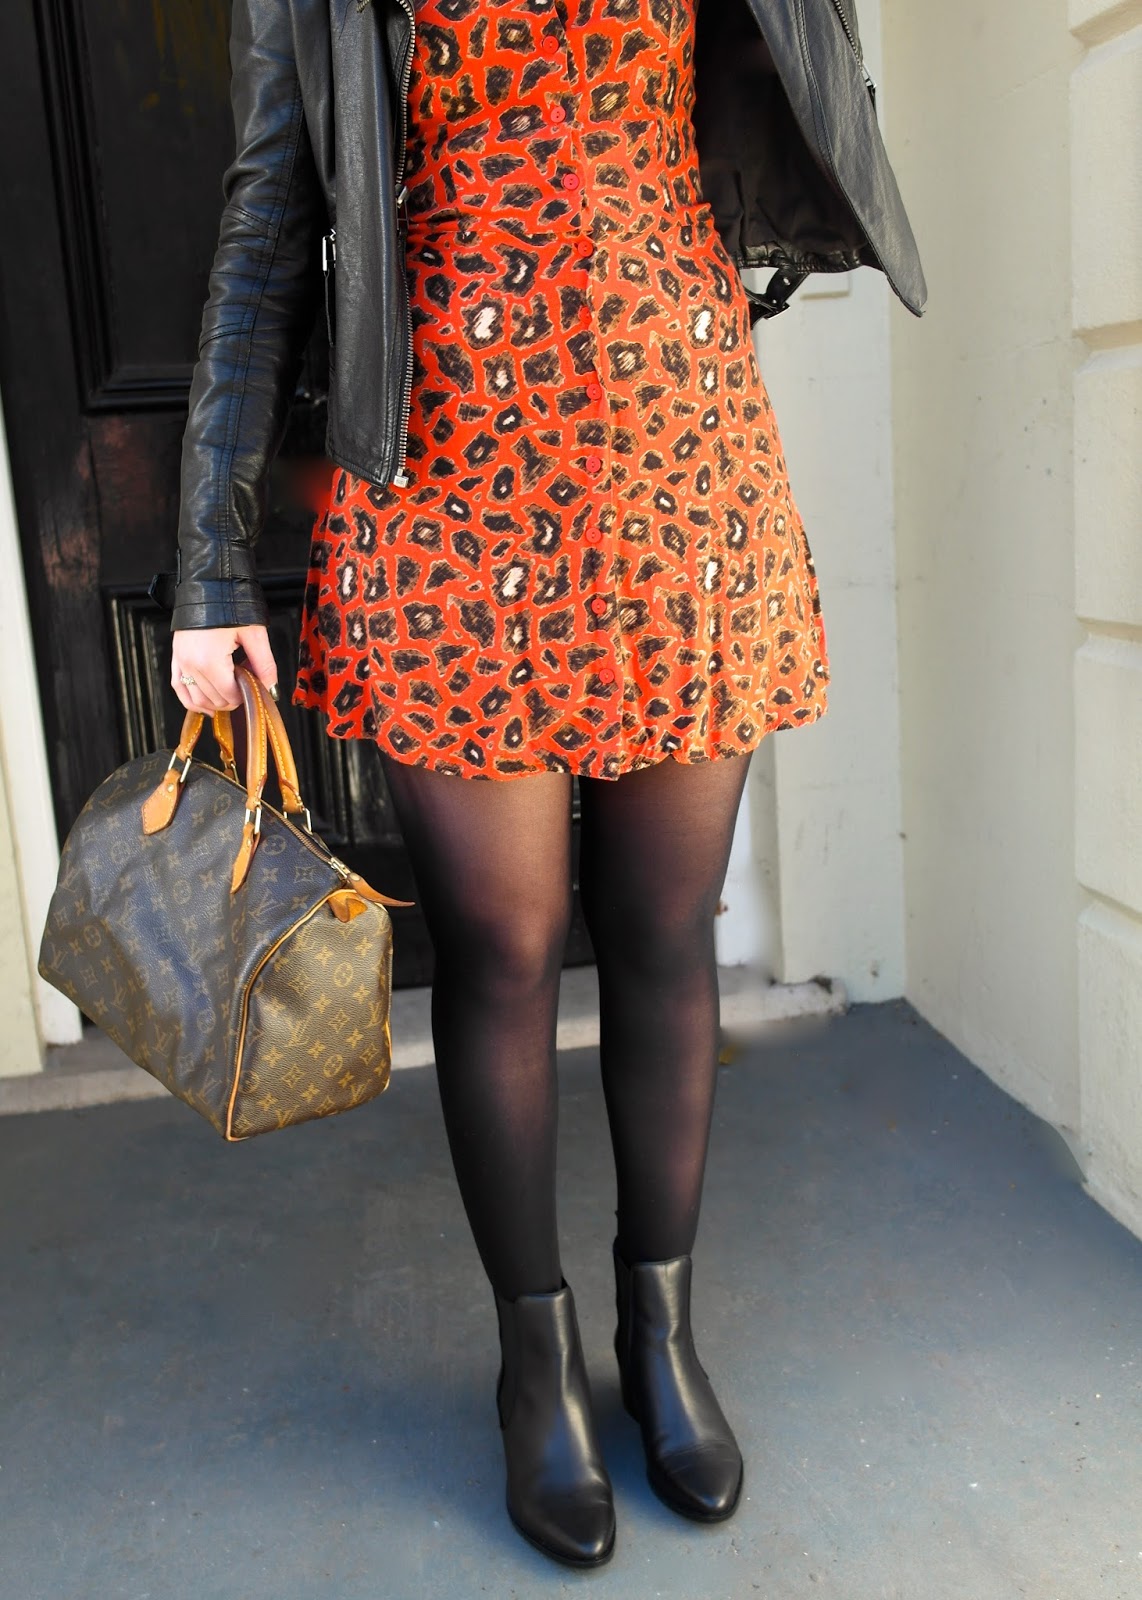 Red leopard print dress and Chelsea boots